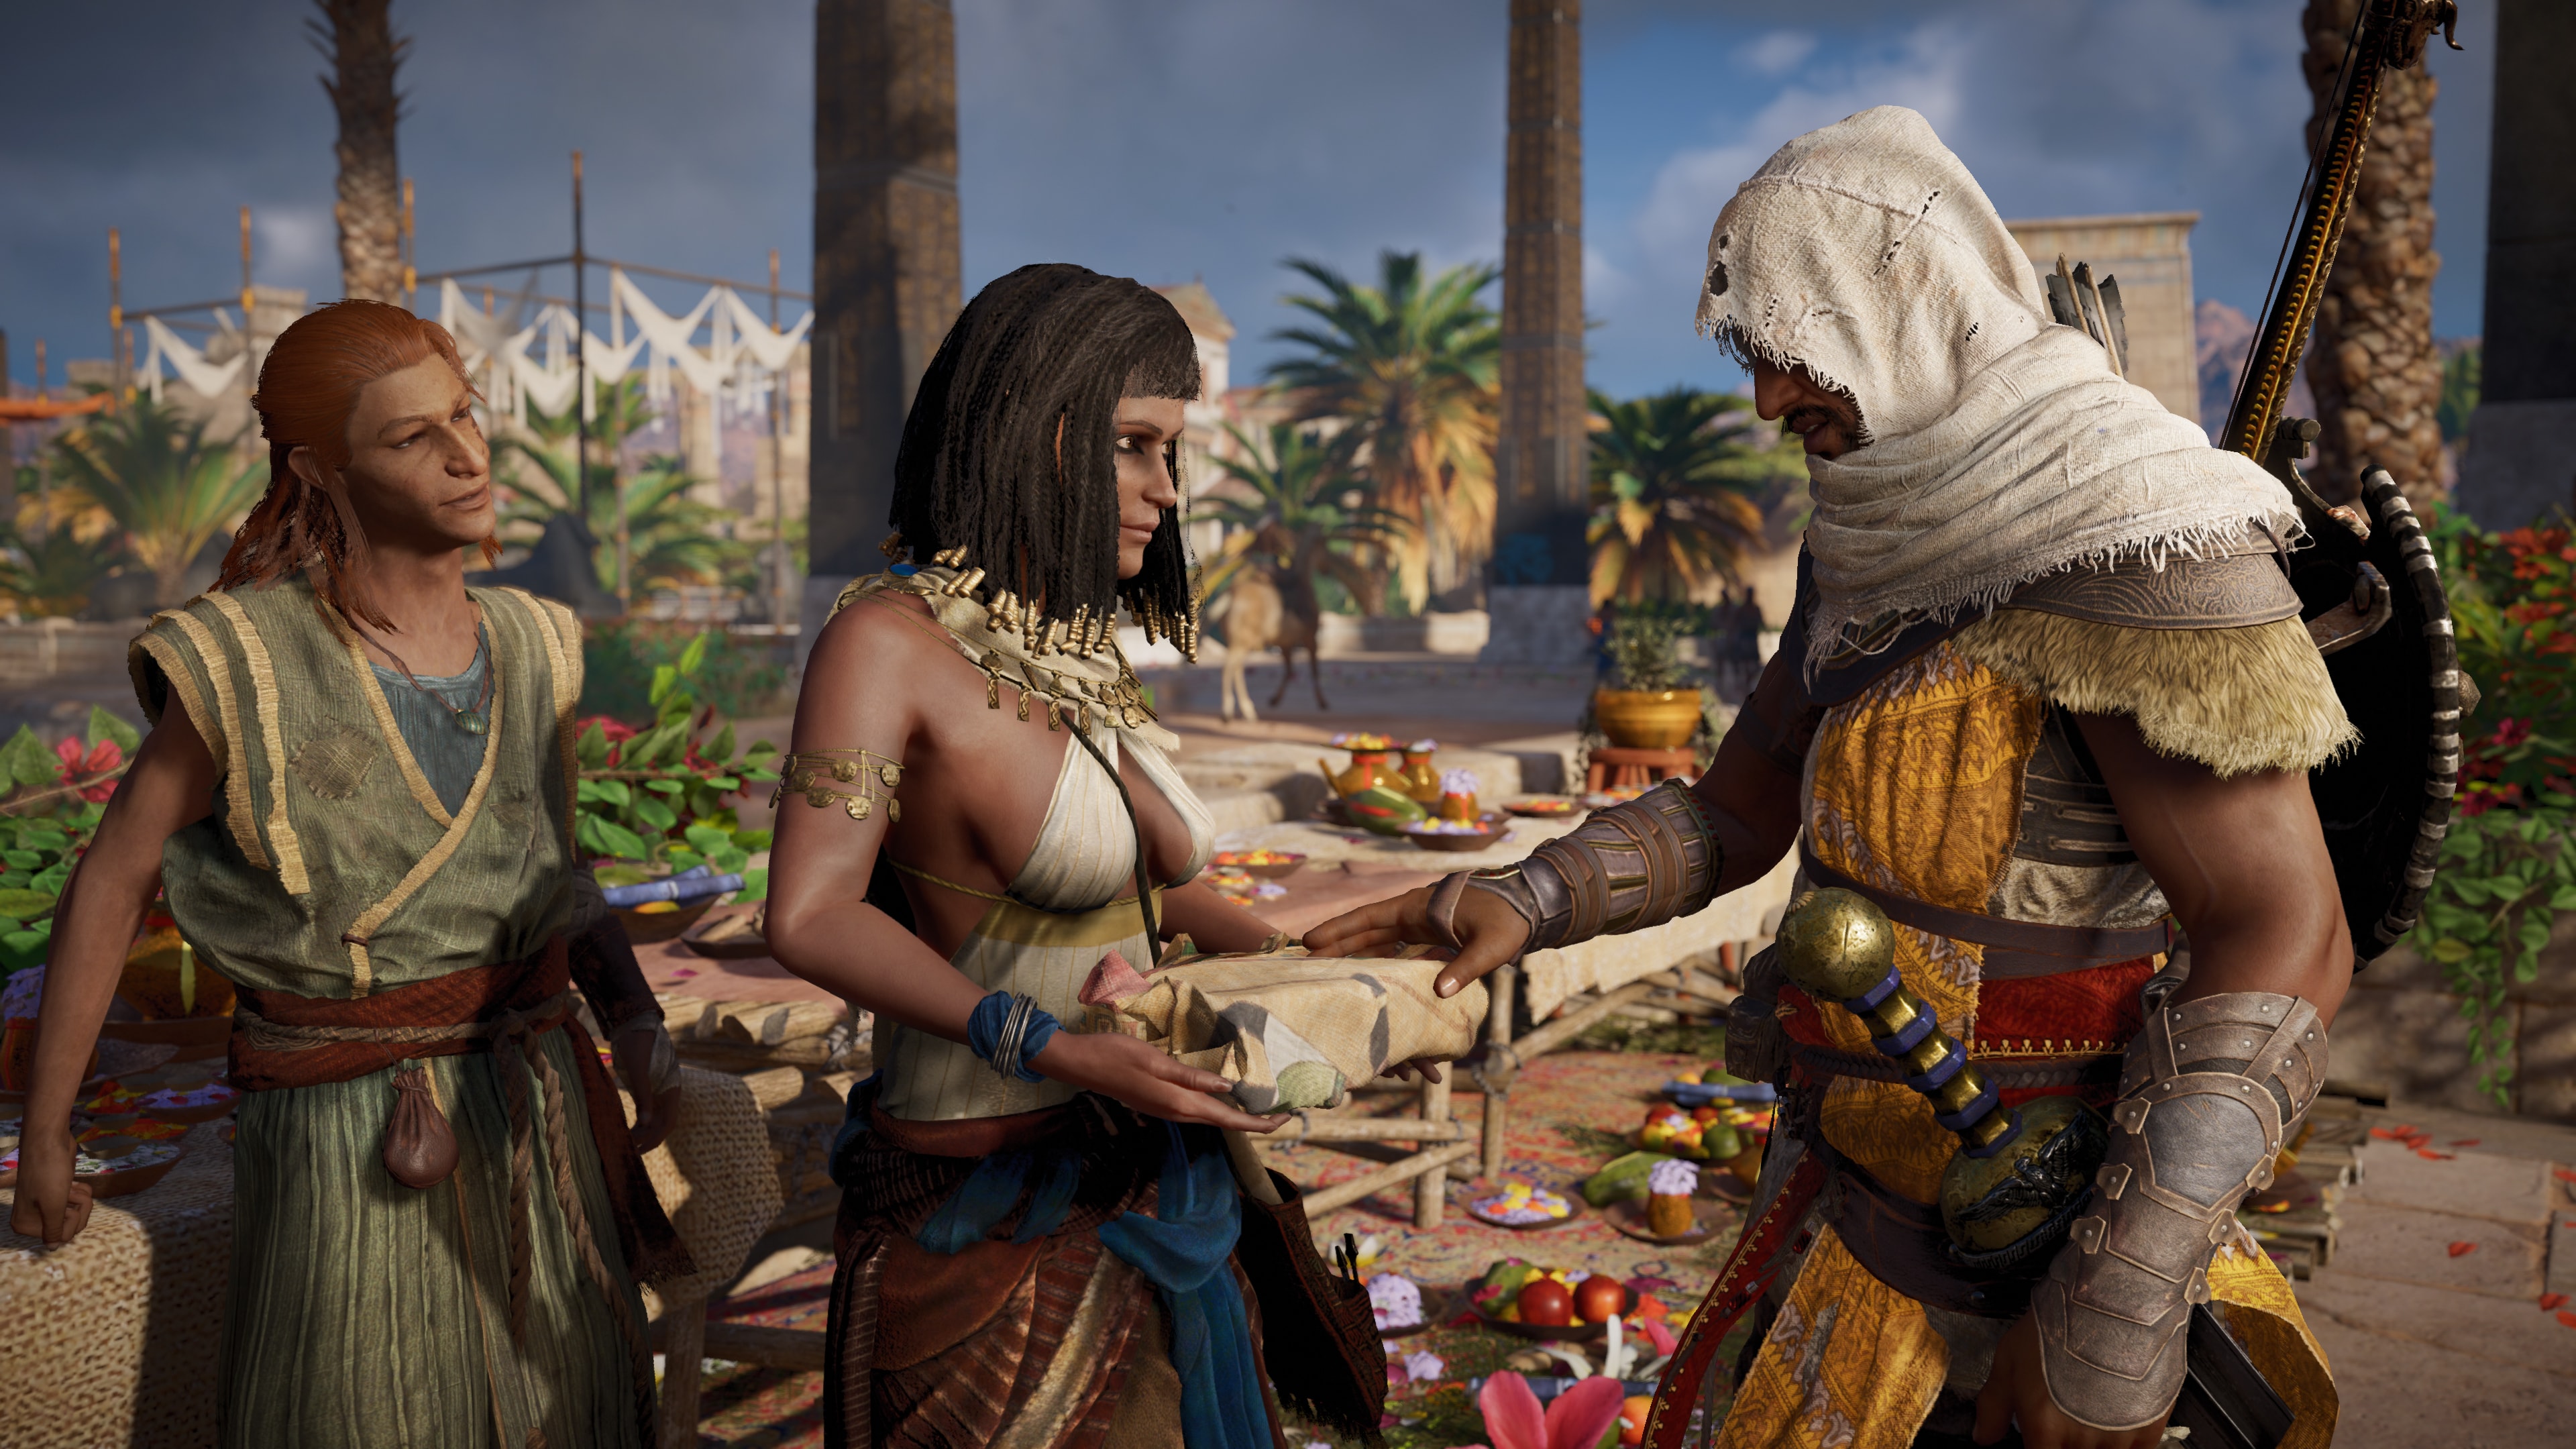 Media asset in full size related to 3dfxzone.it news item entitled as follows: Ubisoft presenta il DLC Curse of the Pharaohs di Assassin's Creed Origins | Image Name: news27909_Assassin-s-Creed-Origins-DLC-Curse-of-the-Pharaohs-Screenshot_2.jpg